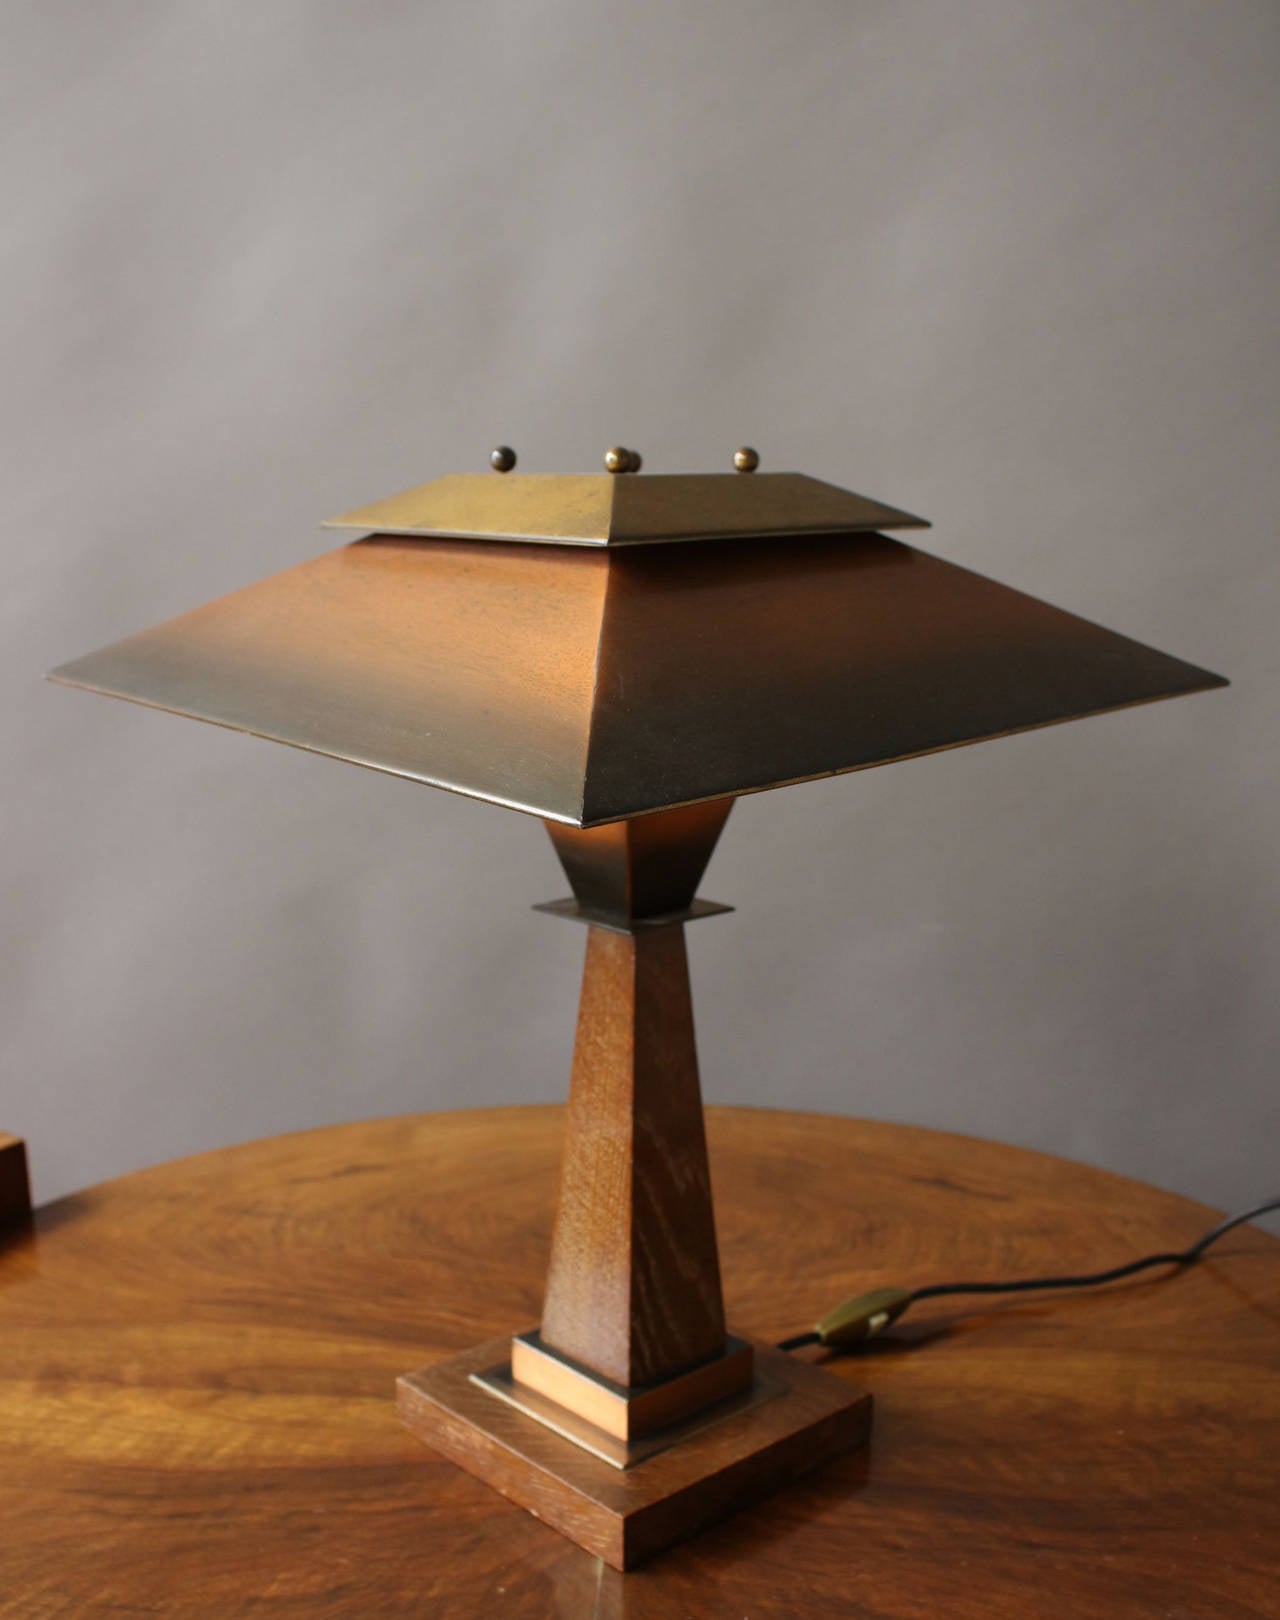 Patinated A Fine French Art Deco Oak and Copper Table Lamp by Emile Jacot